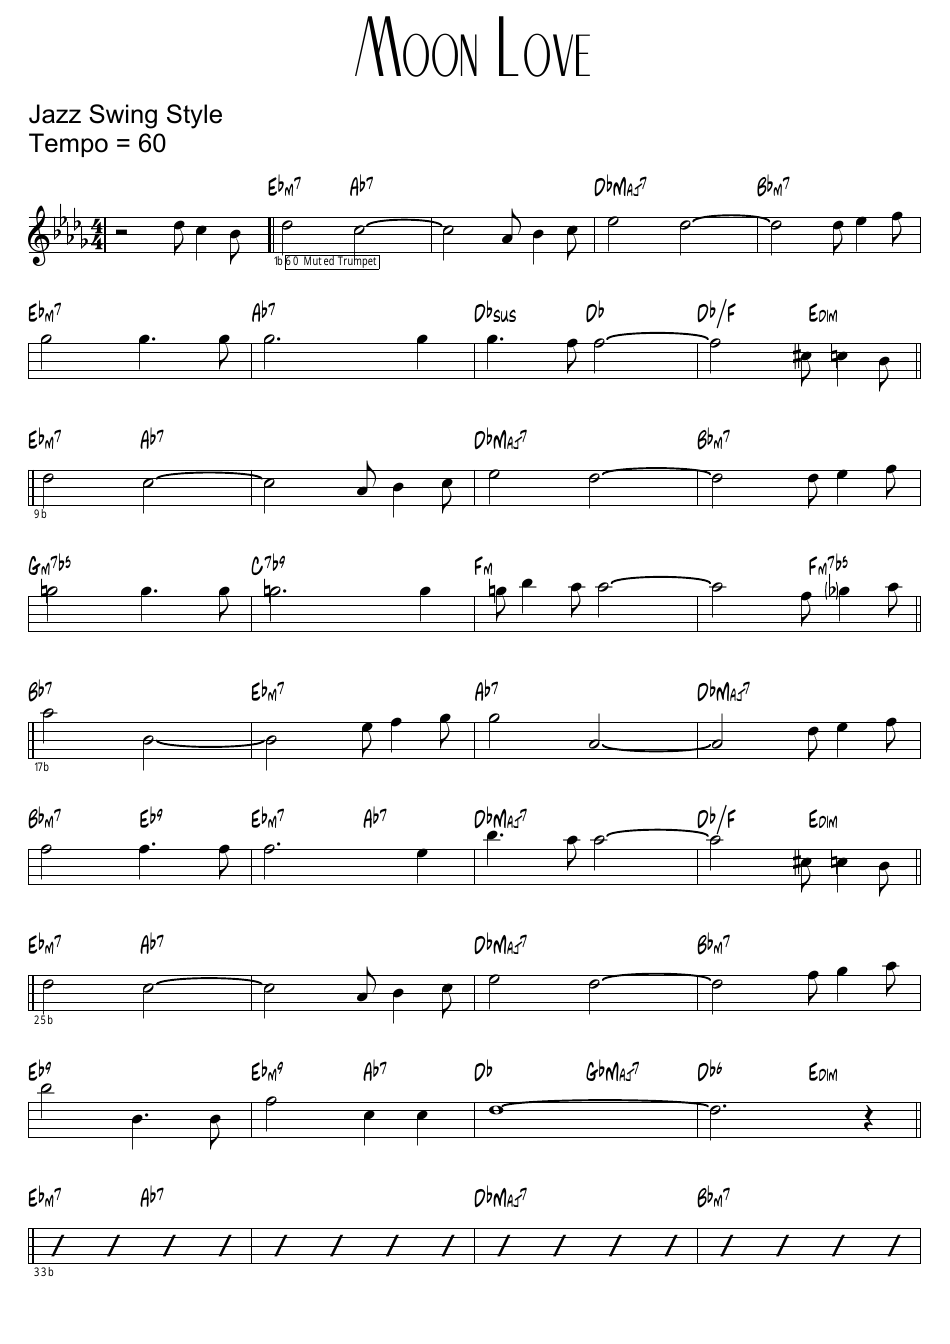 Moon Love Jazz Swing Style Sheet Music Preview Image